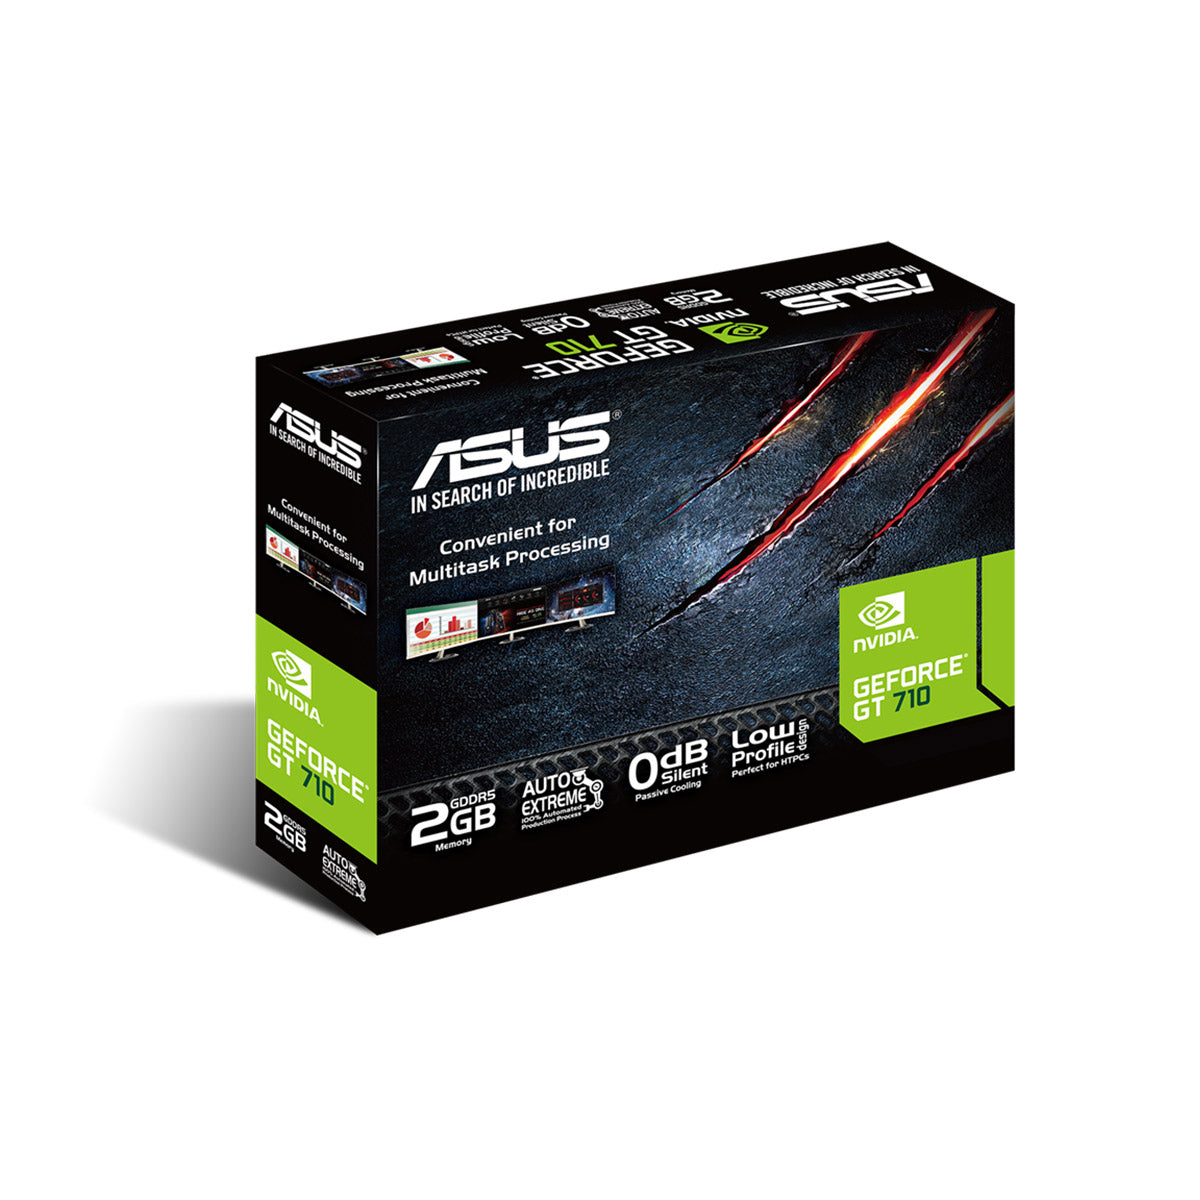 [RePacked] ASUS GeForce GT710 2GB GDDR5 64-Bit Graphics Card with 0db Low Profile